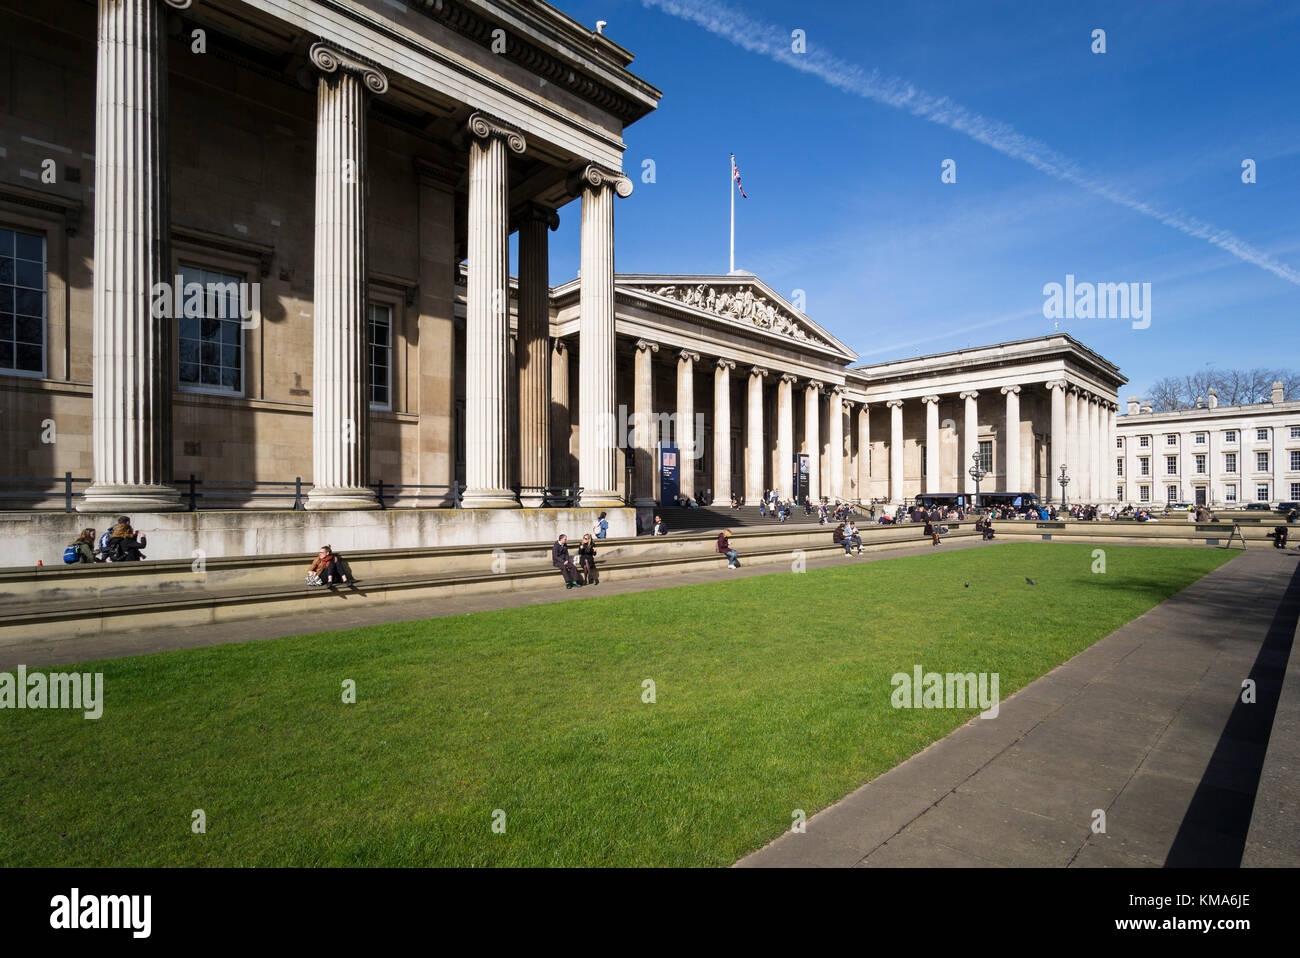 London. England. Greek Revival exterior of the British Museum, designed by Sir Robert Smirke (1780–1867) in 1823 and completed in 1852. Stock Photo